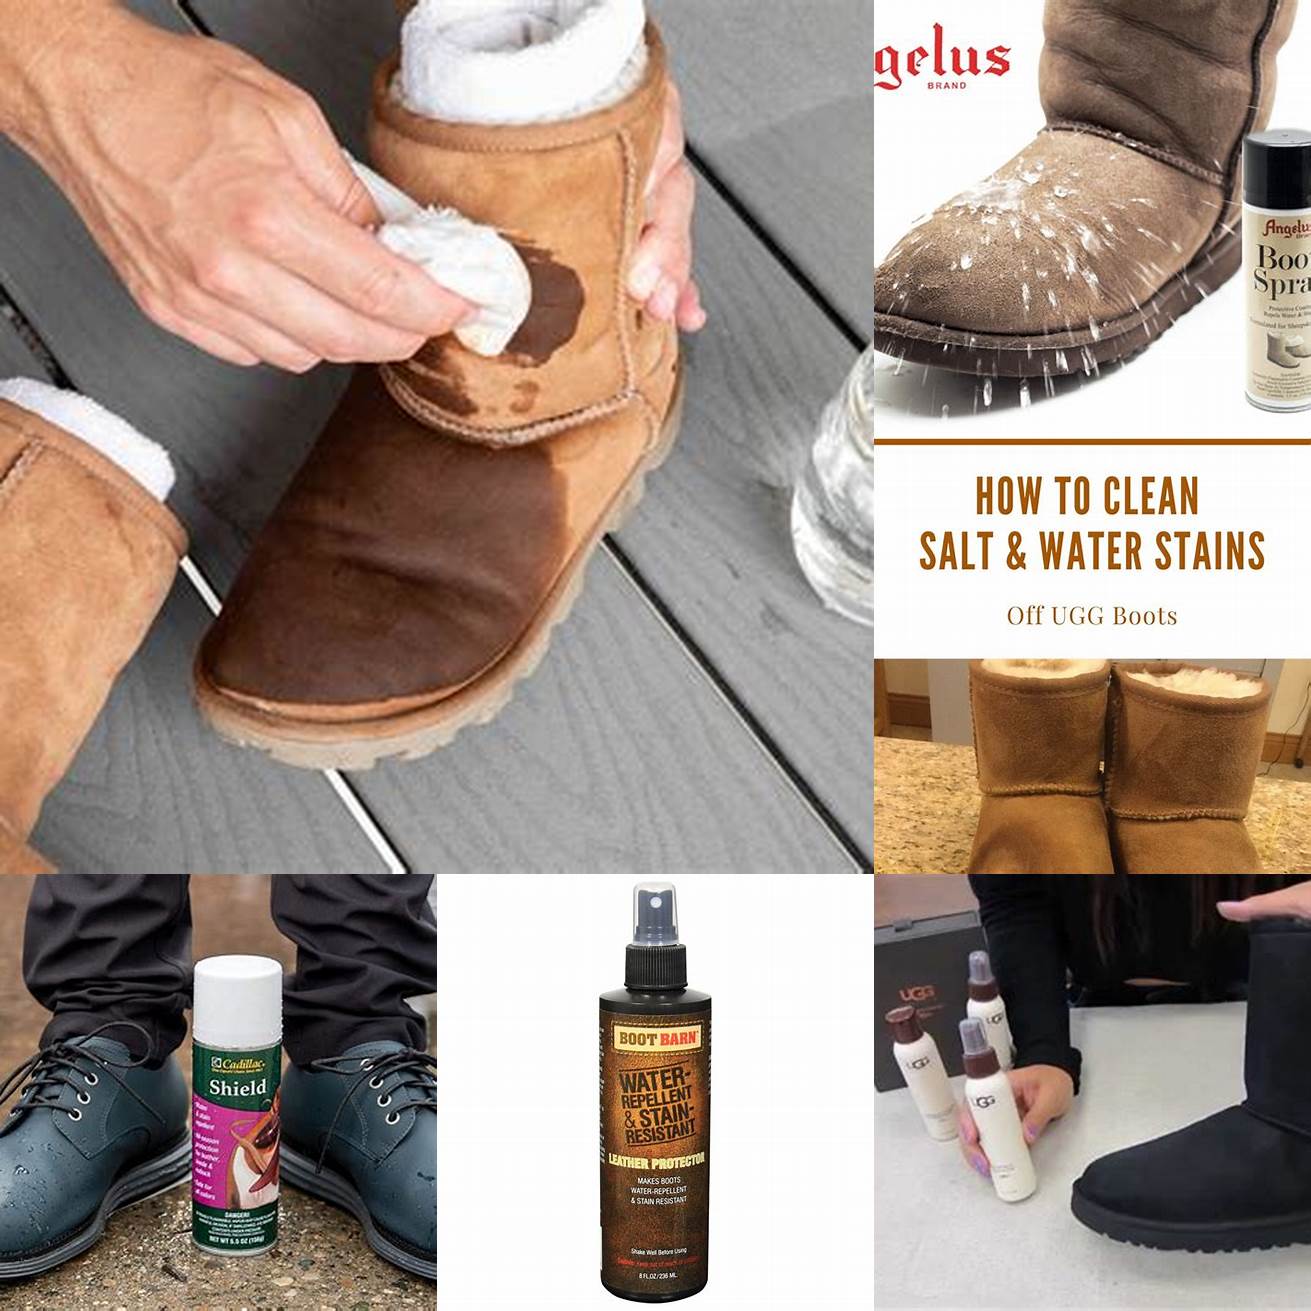 3 Protect your boots from water and stains